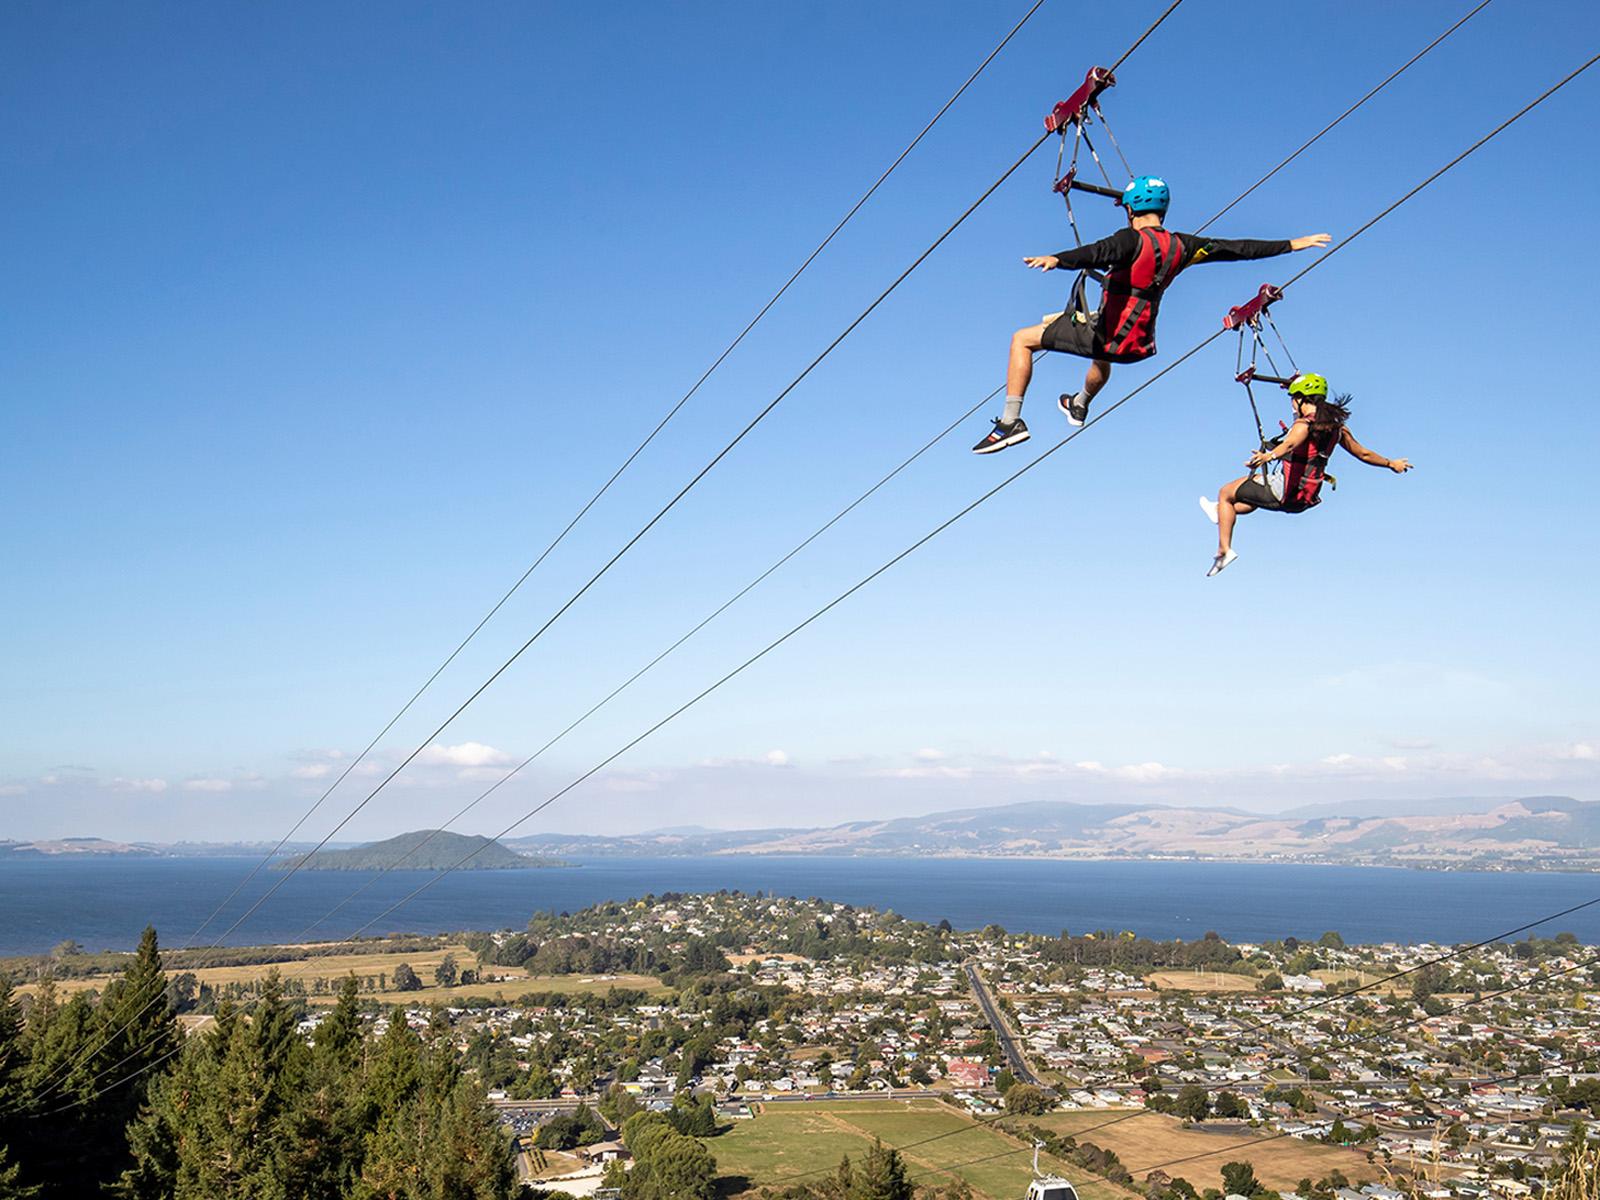 Two people high up in the air doing the zipline